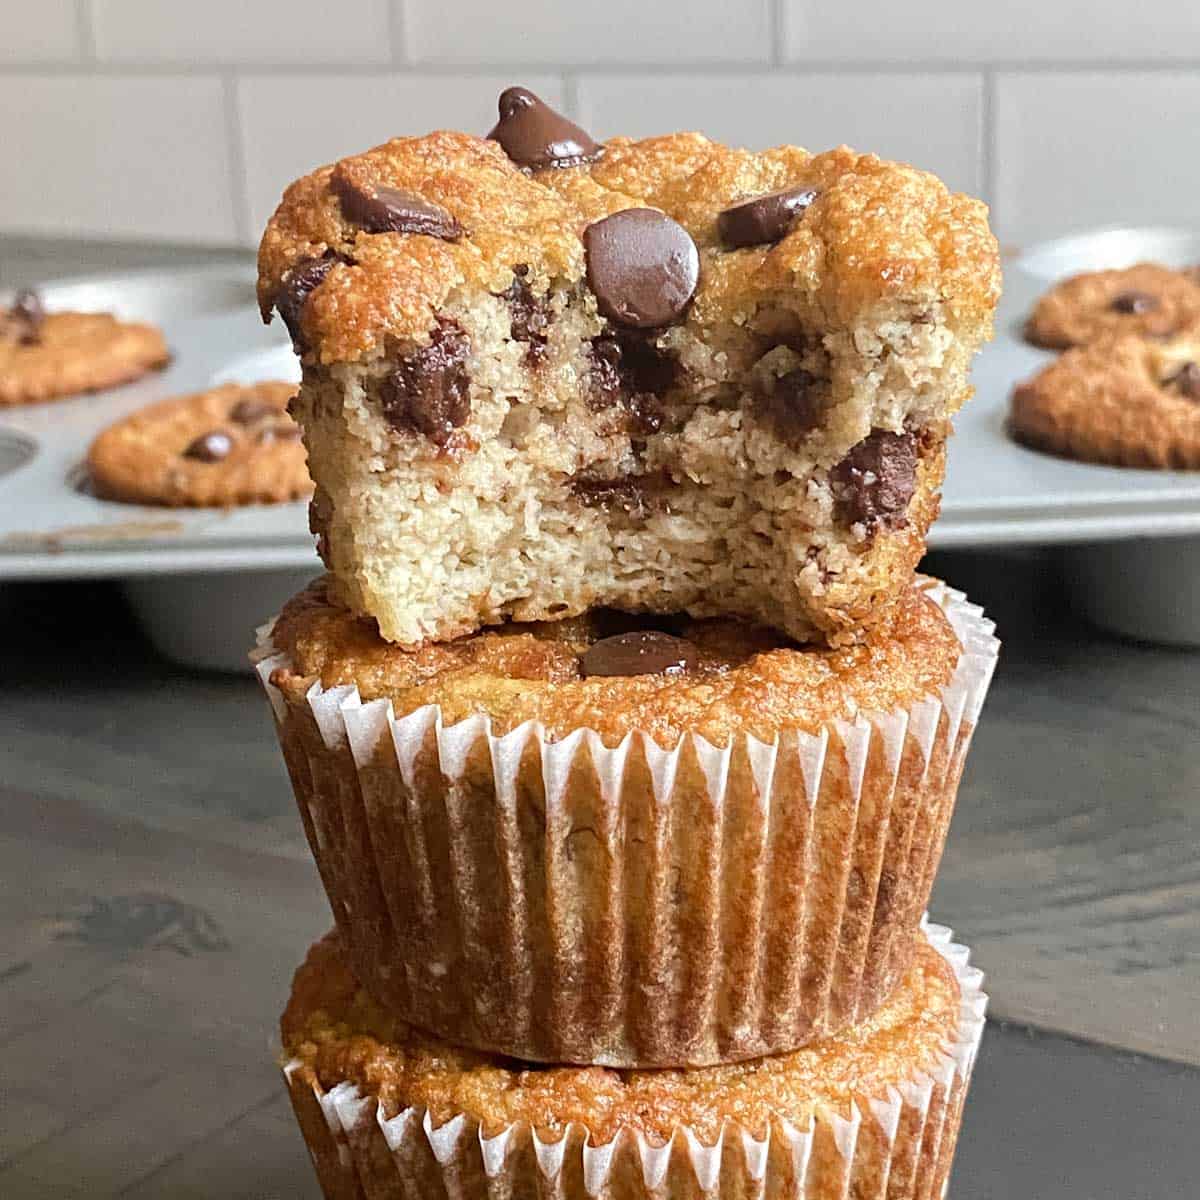 three banana muffins with chocolate chips stacked on top of each other, the top one has a bite taken out of it to show the fluffy inside.